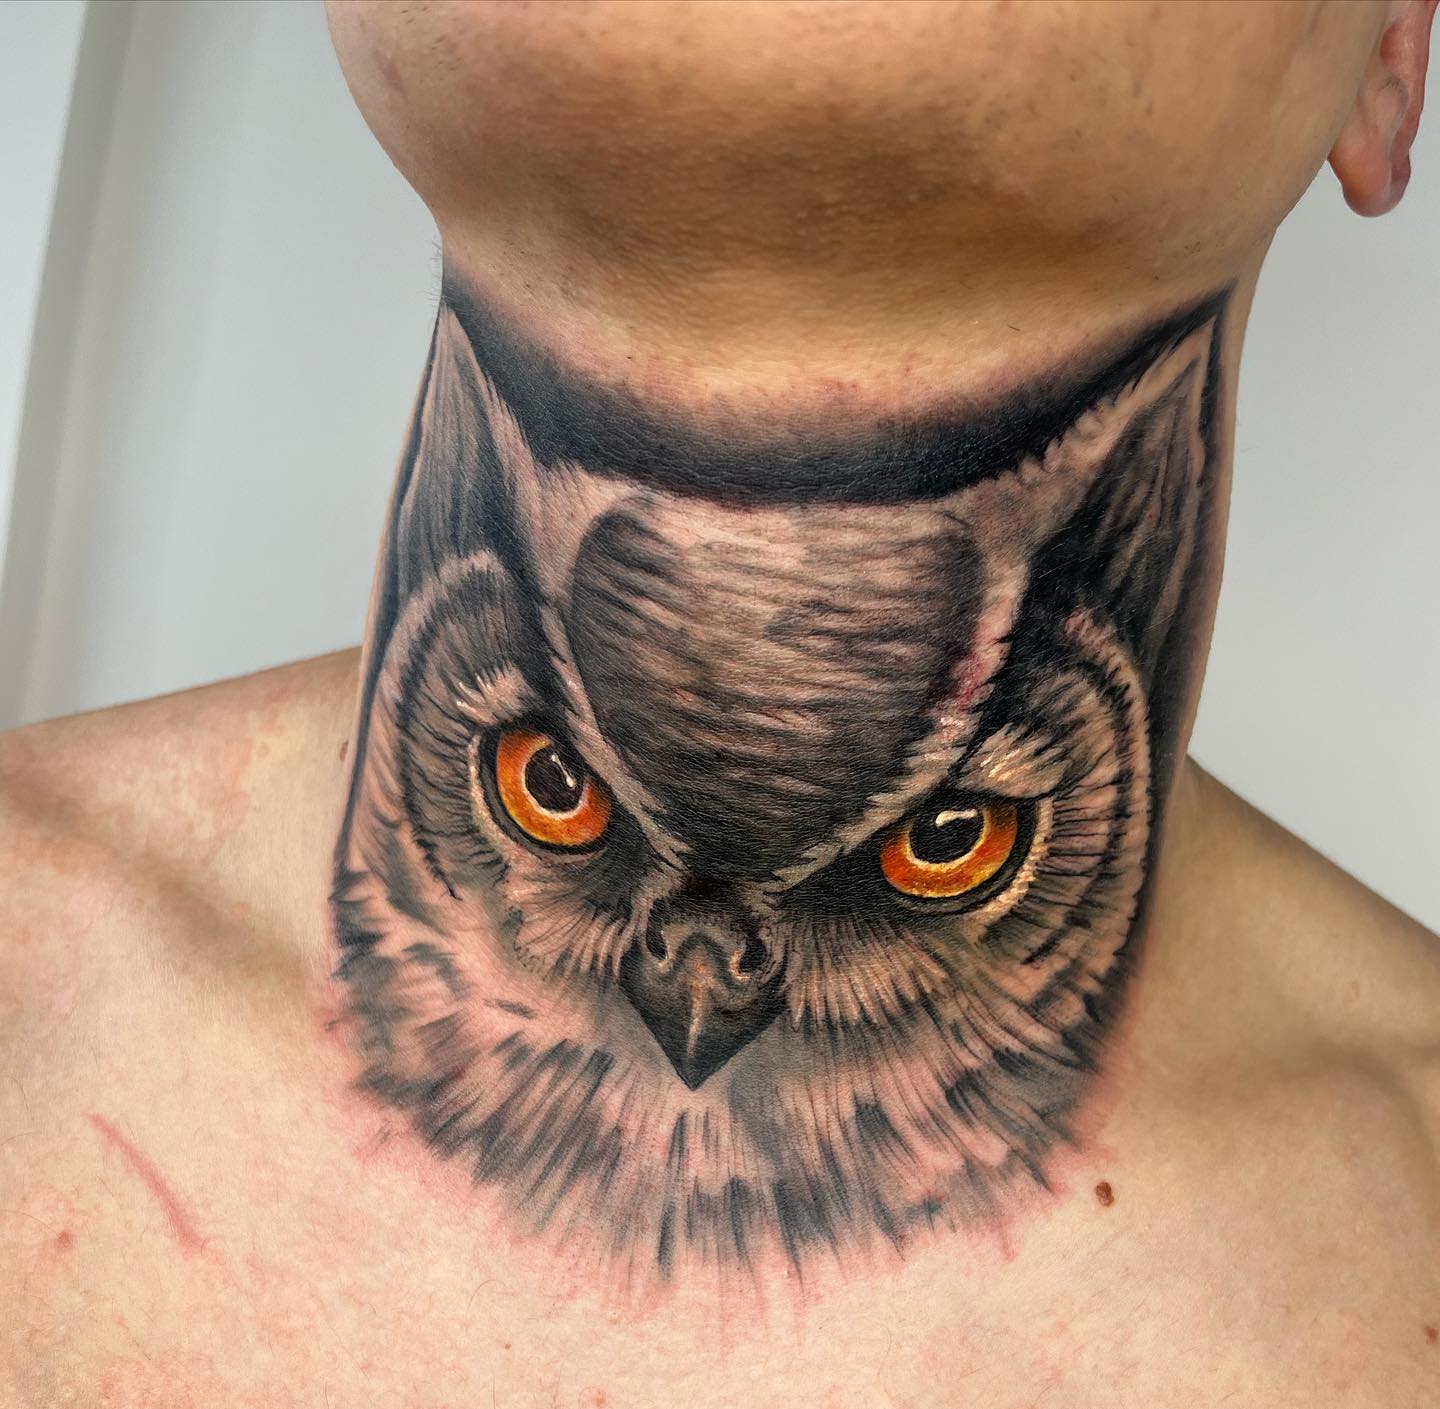 It's a fabulous owl work with detailed feather lines, colors and shadows. In general, owl tattoo symbolizes the wisdom and mystery, also in Native American cultures, it represents the afterlife. This mysterious animal will be a right choice for you.